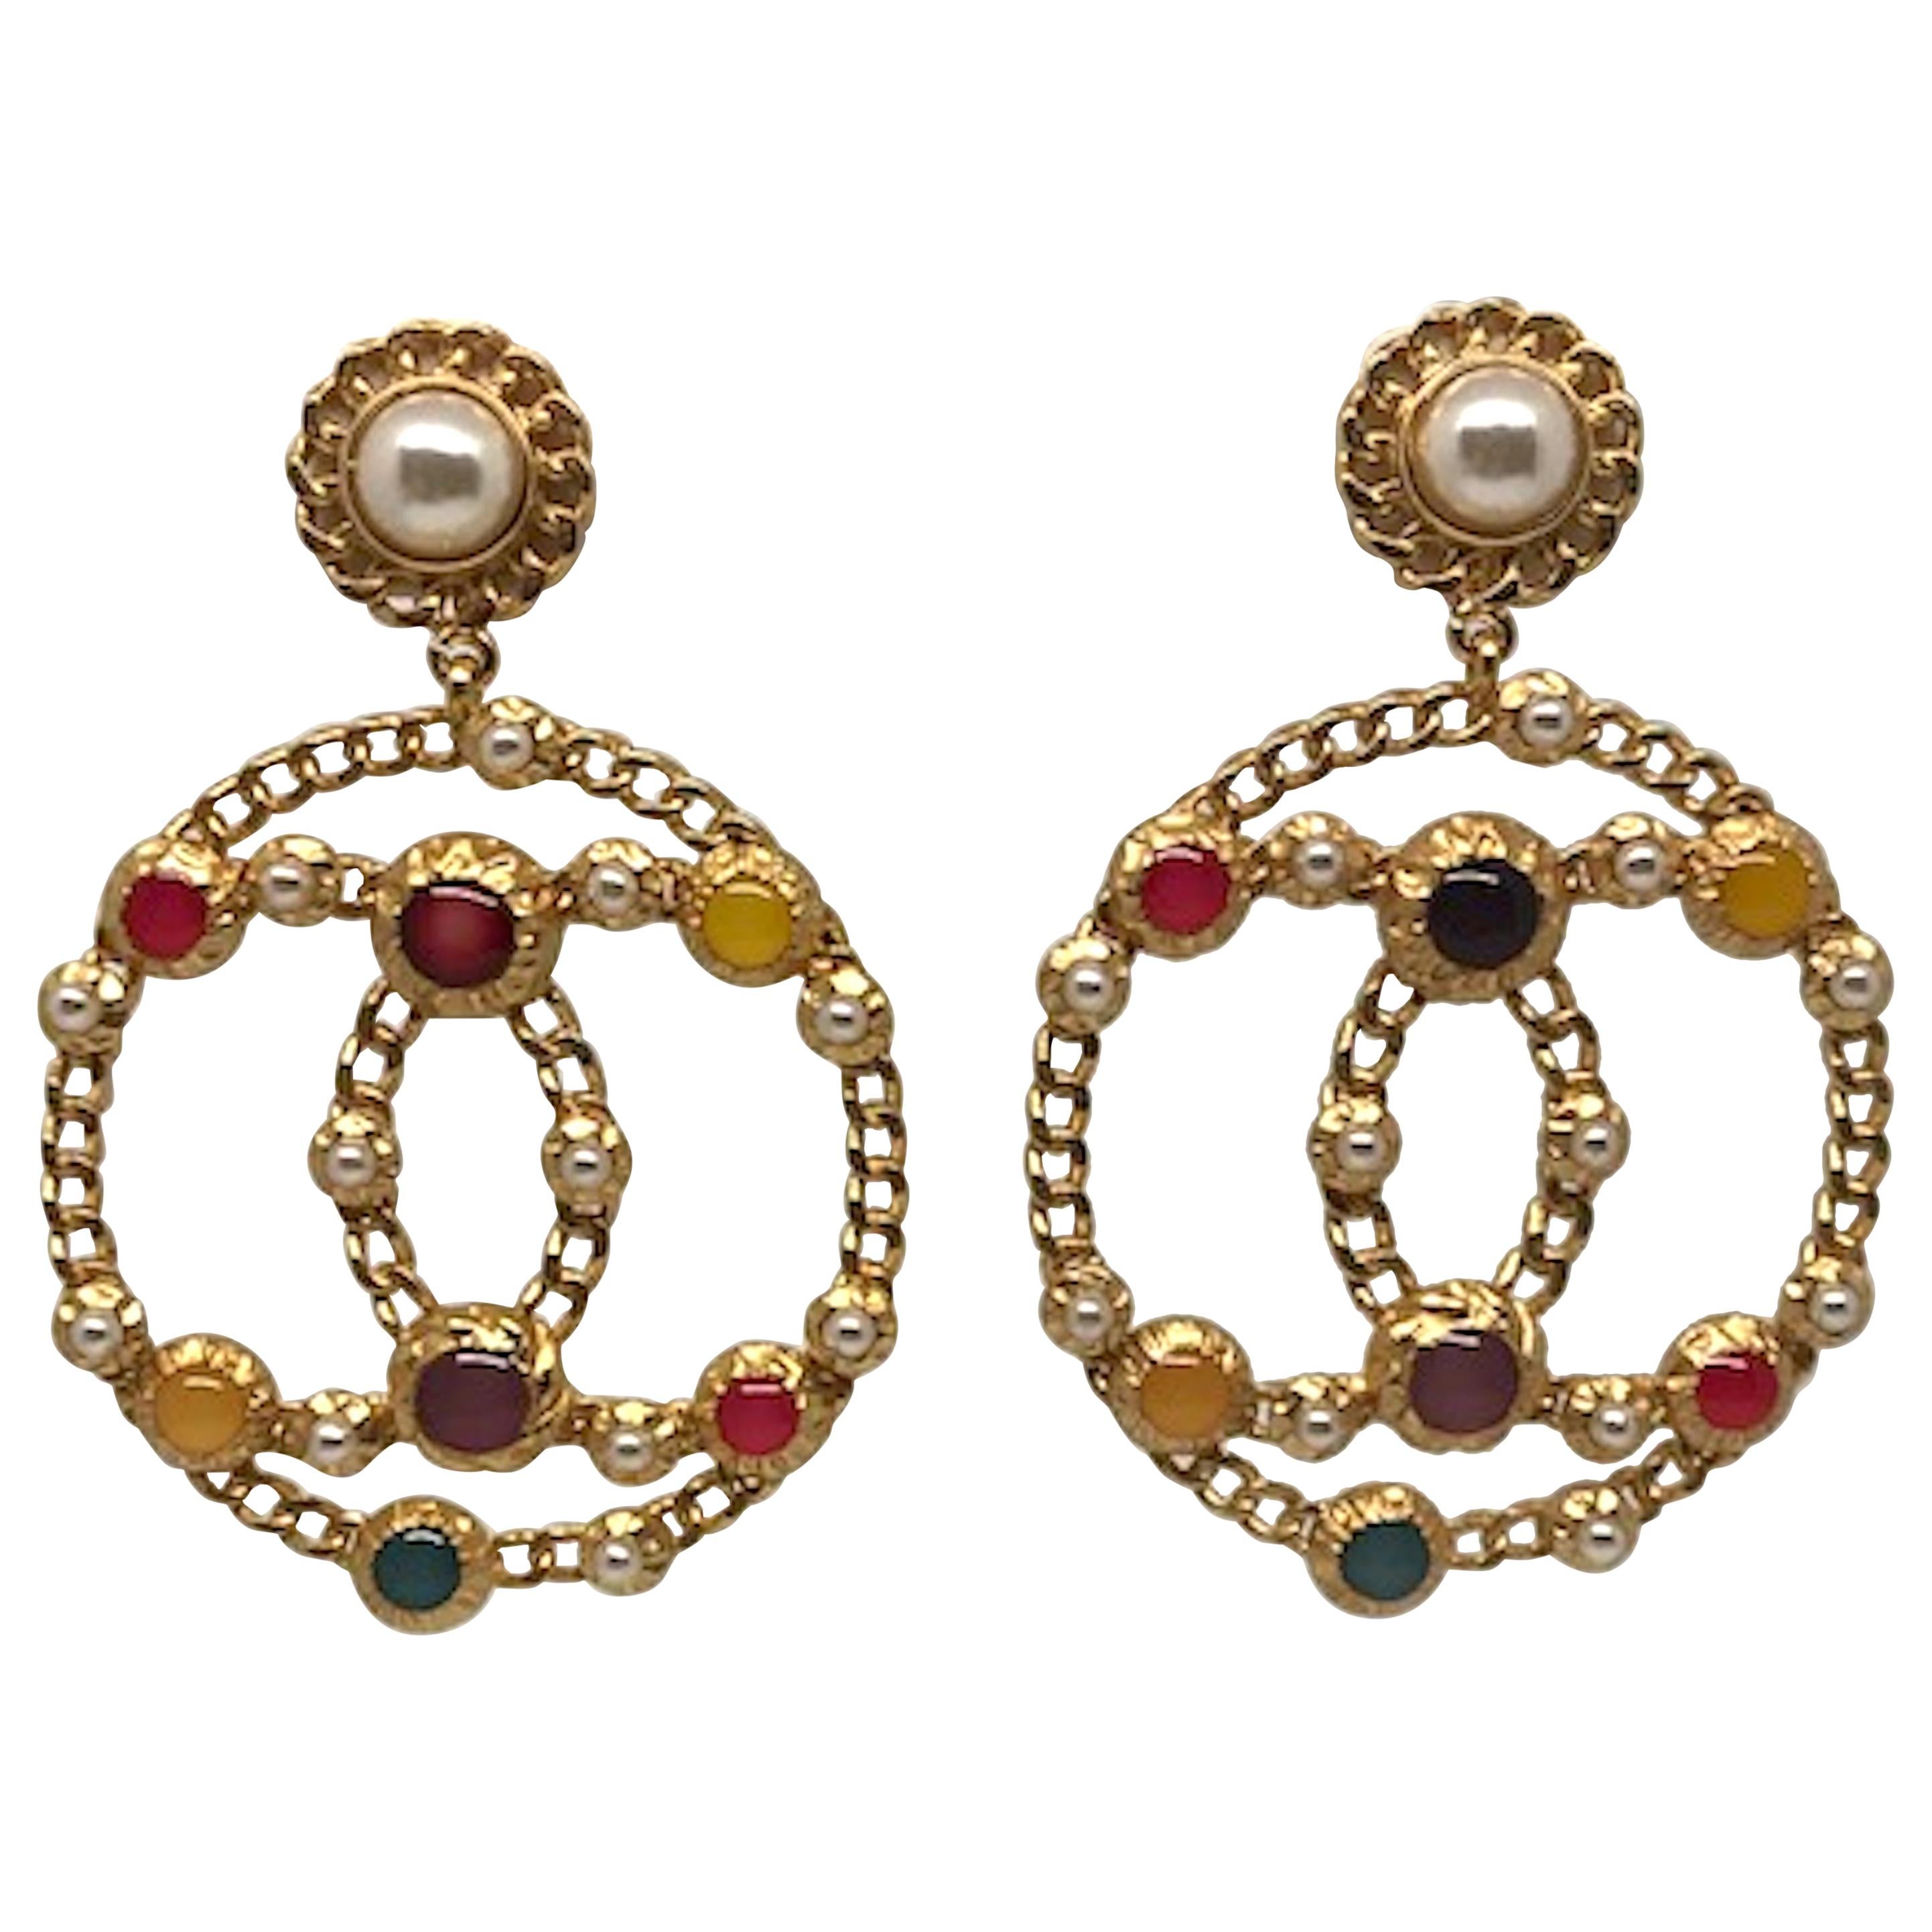 Chanel Gripoix Cabochon, Pearl and Enamel Large Pendant Earrings,  2018